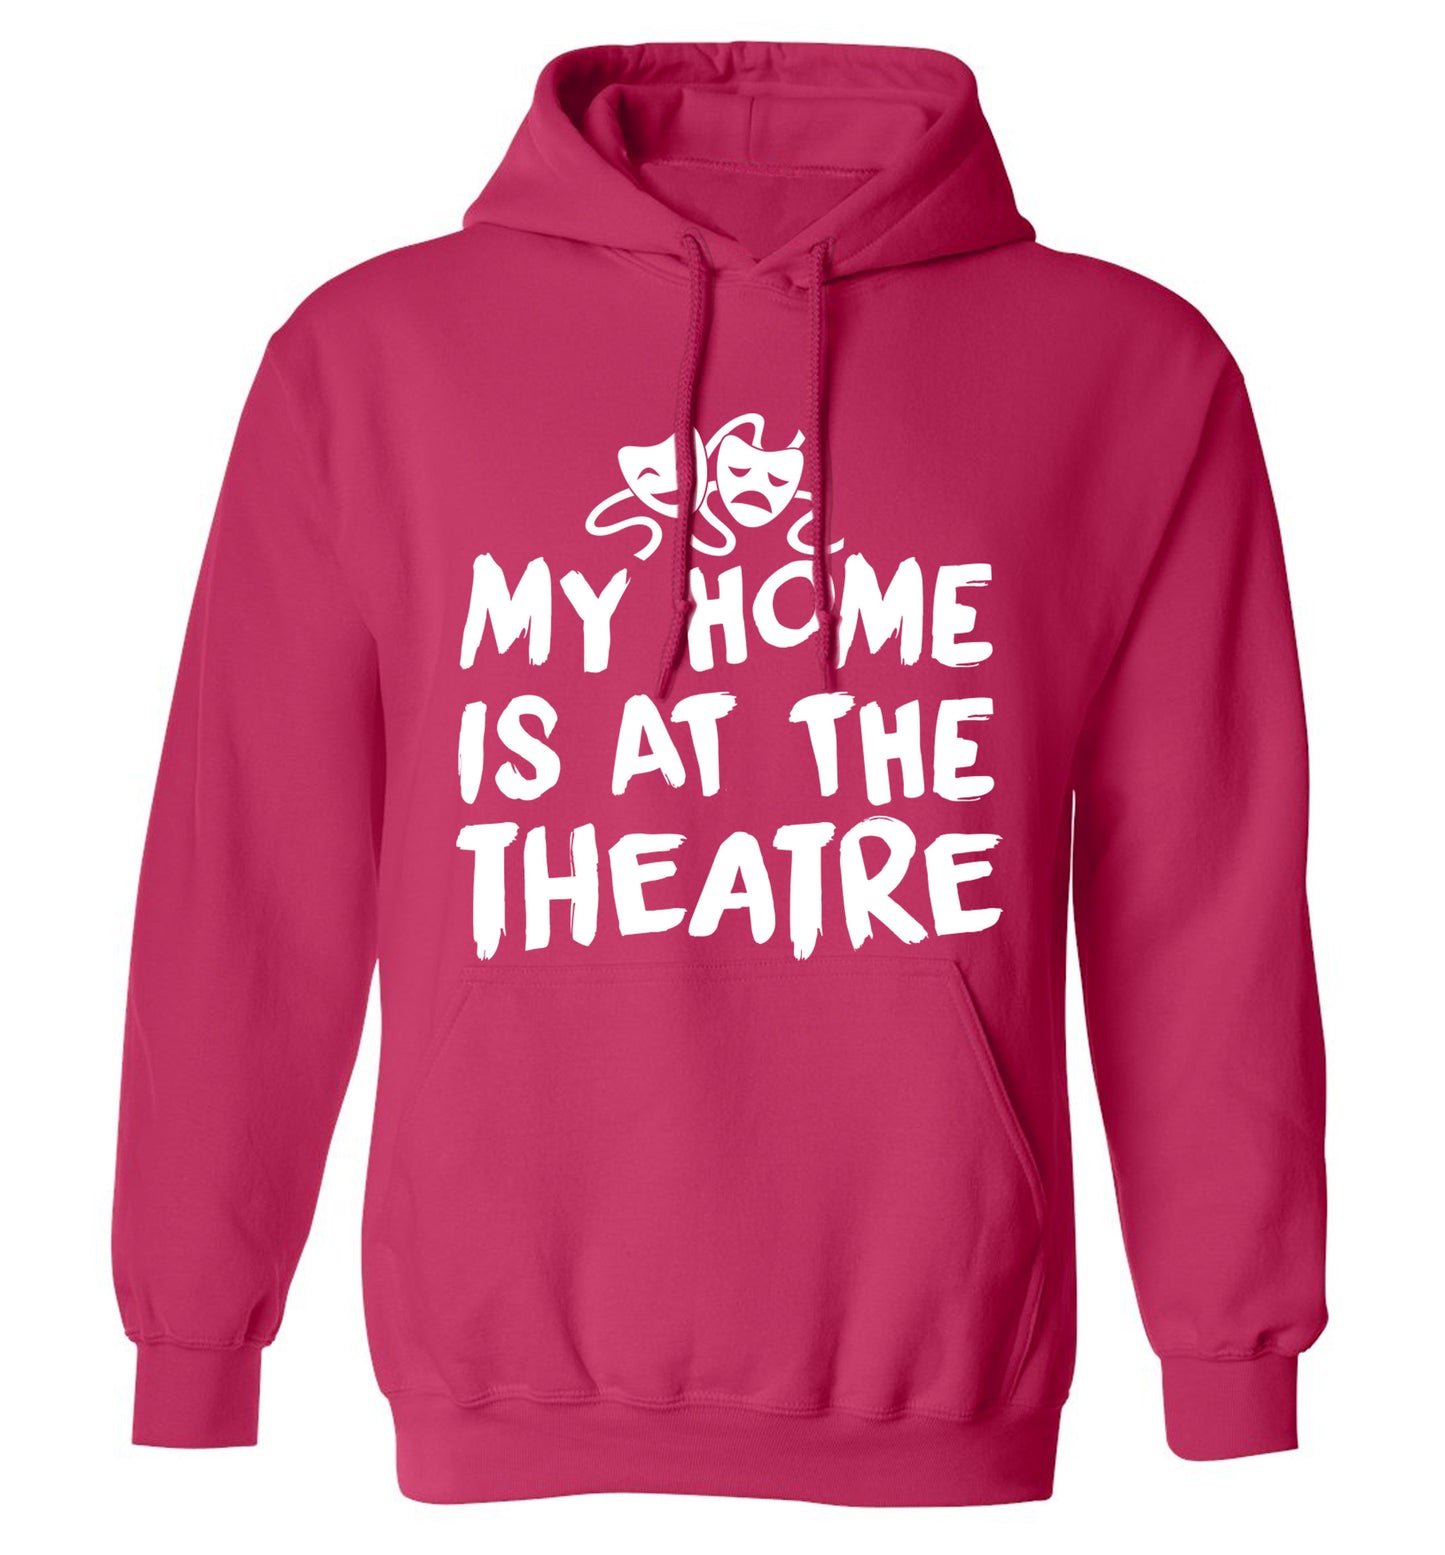 My home is at the theatre adults unisex pink hoodie 2XL